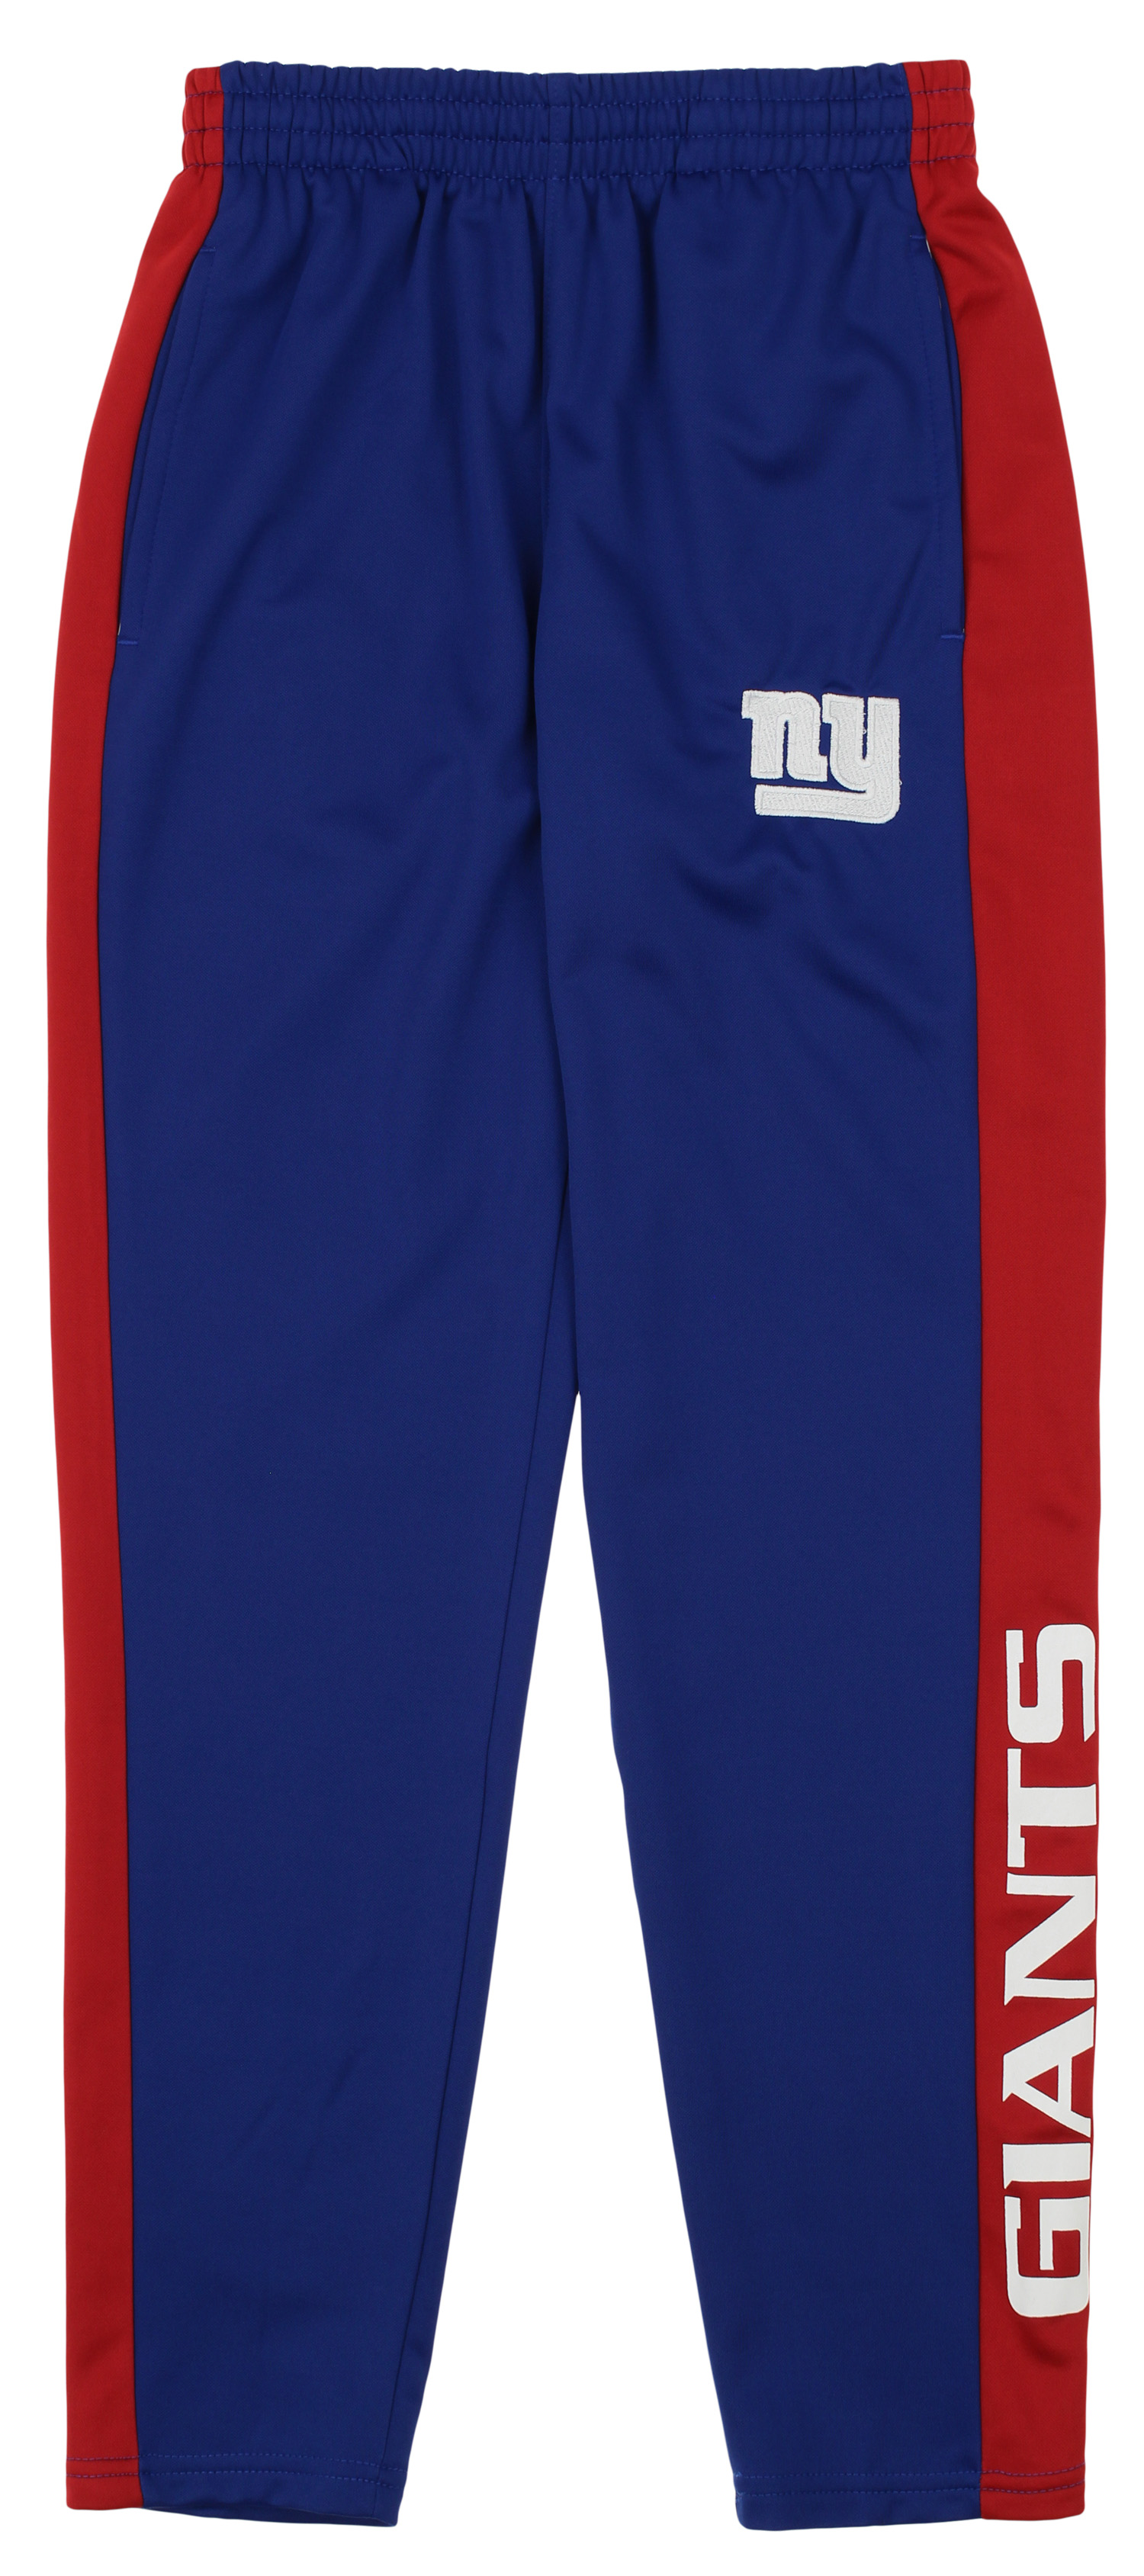 OuterStuff NFL Youth Boys Side Stripe Slim Fit Performance Pant, New ...